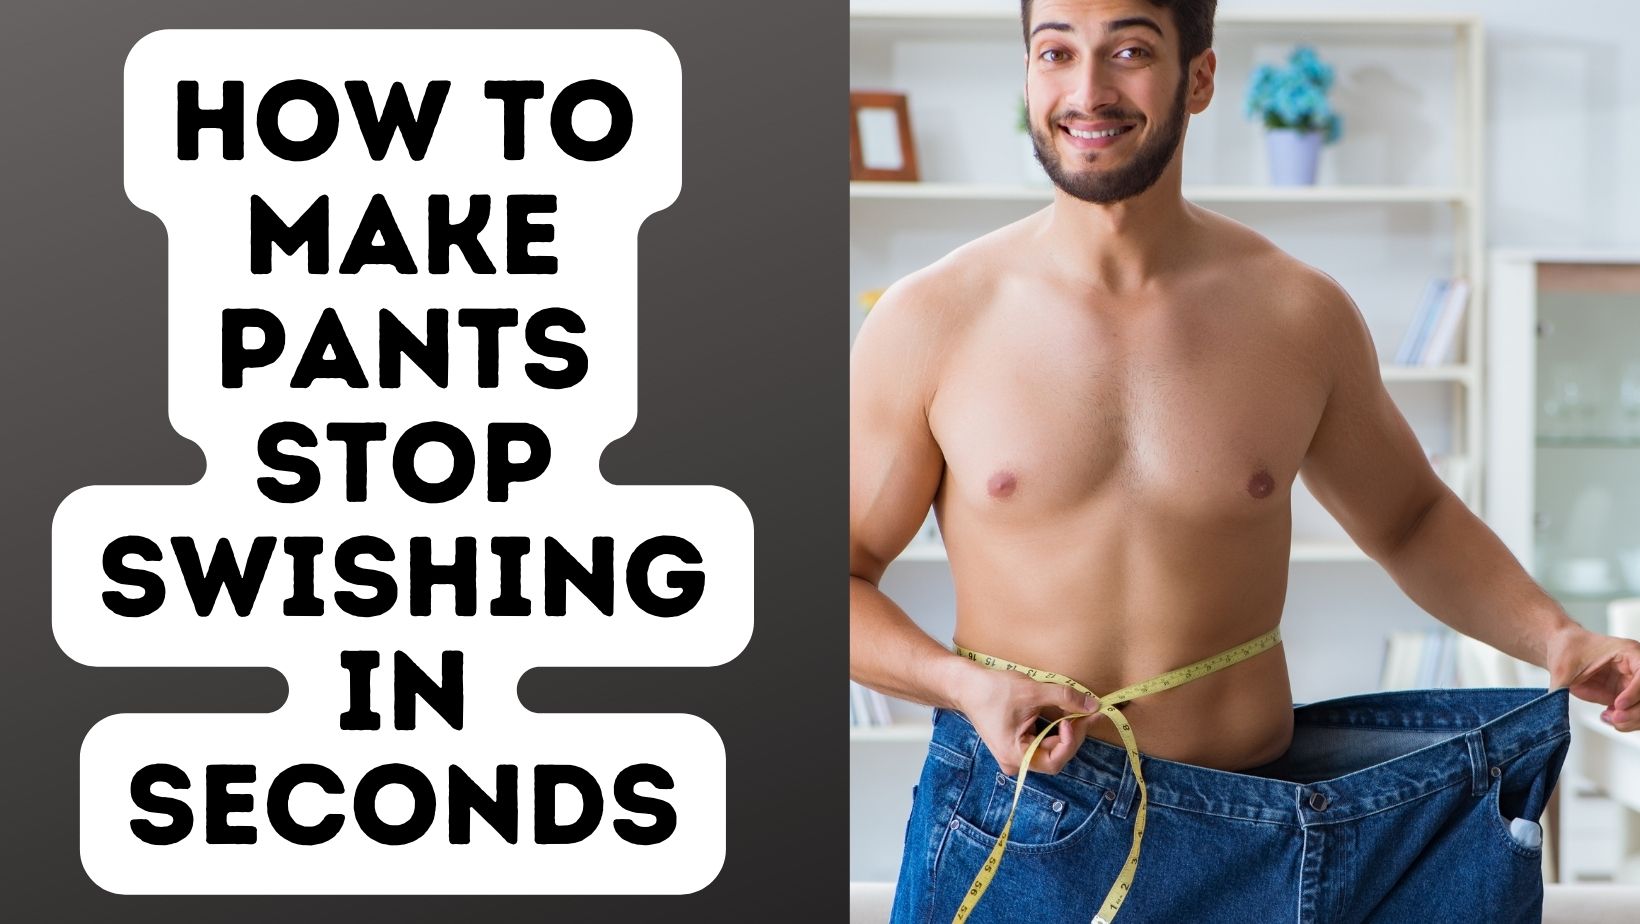 How To Make Pants Stop Swishing In Seconds